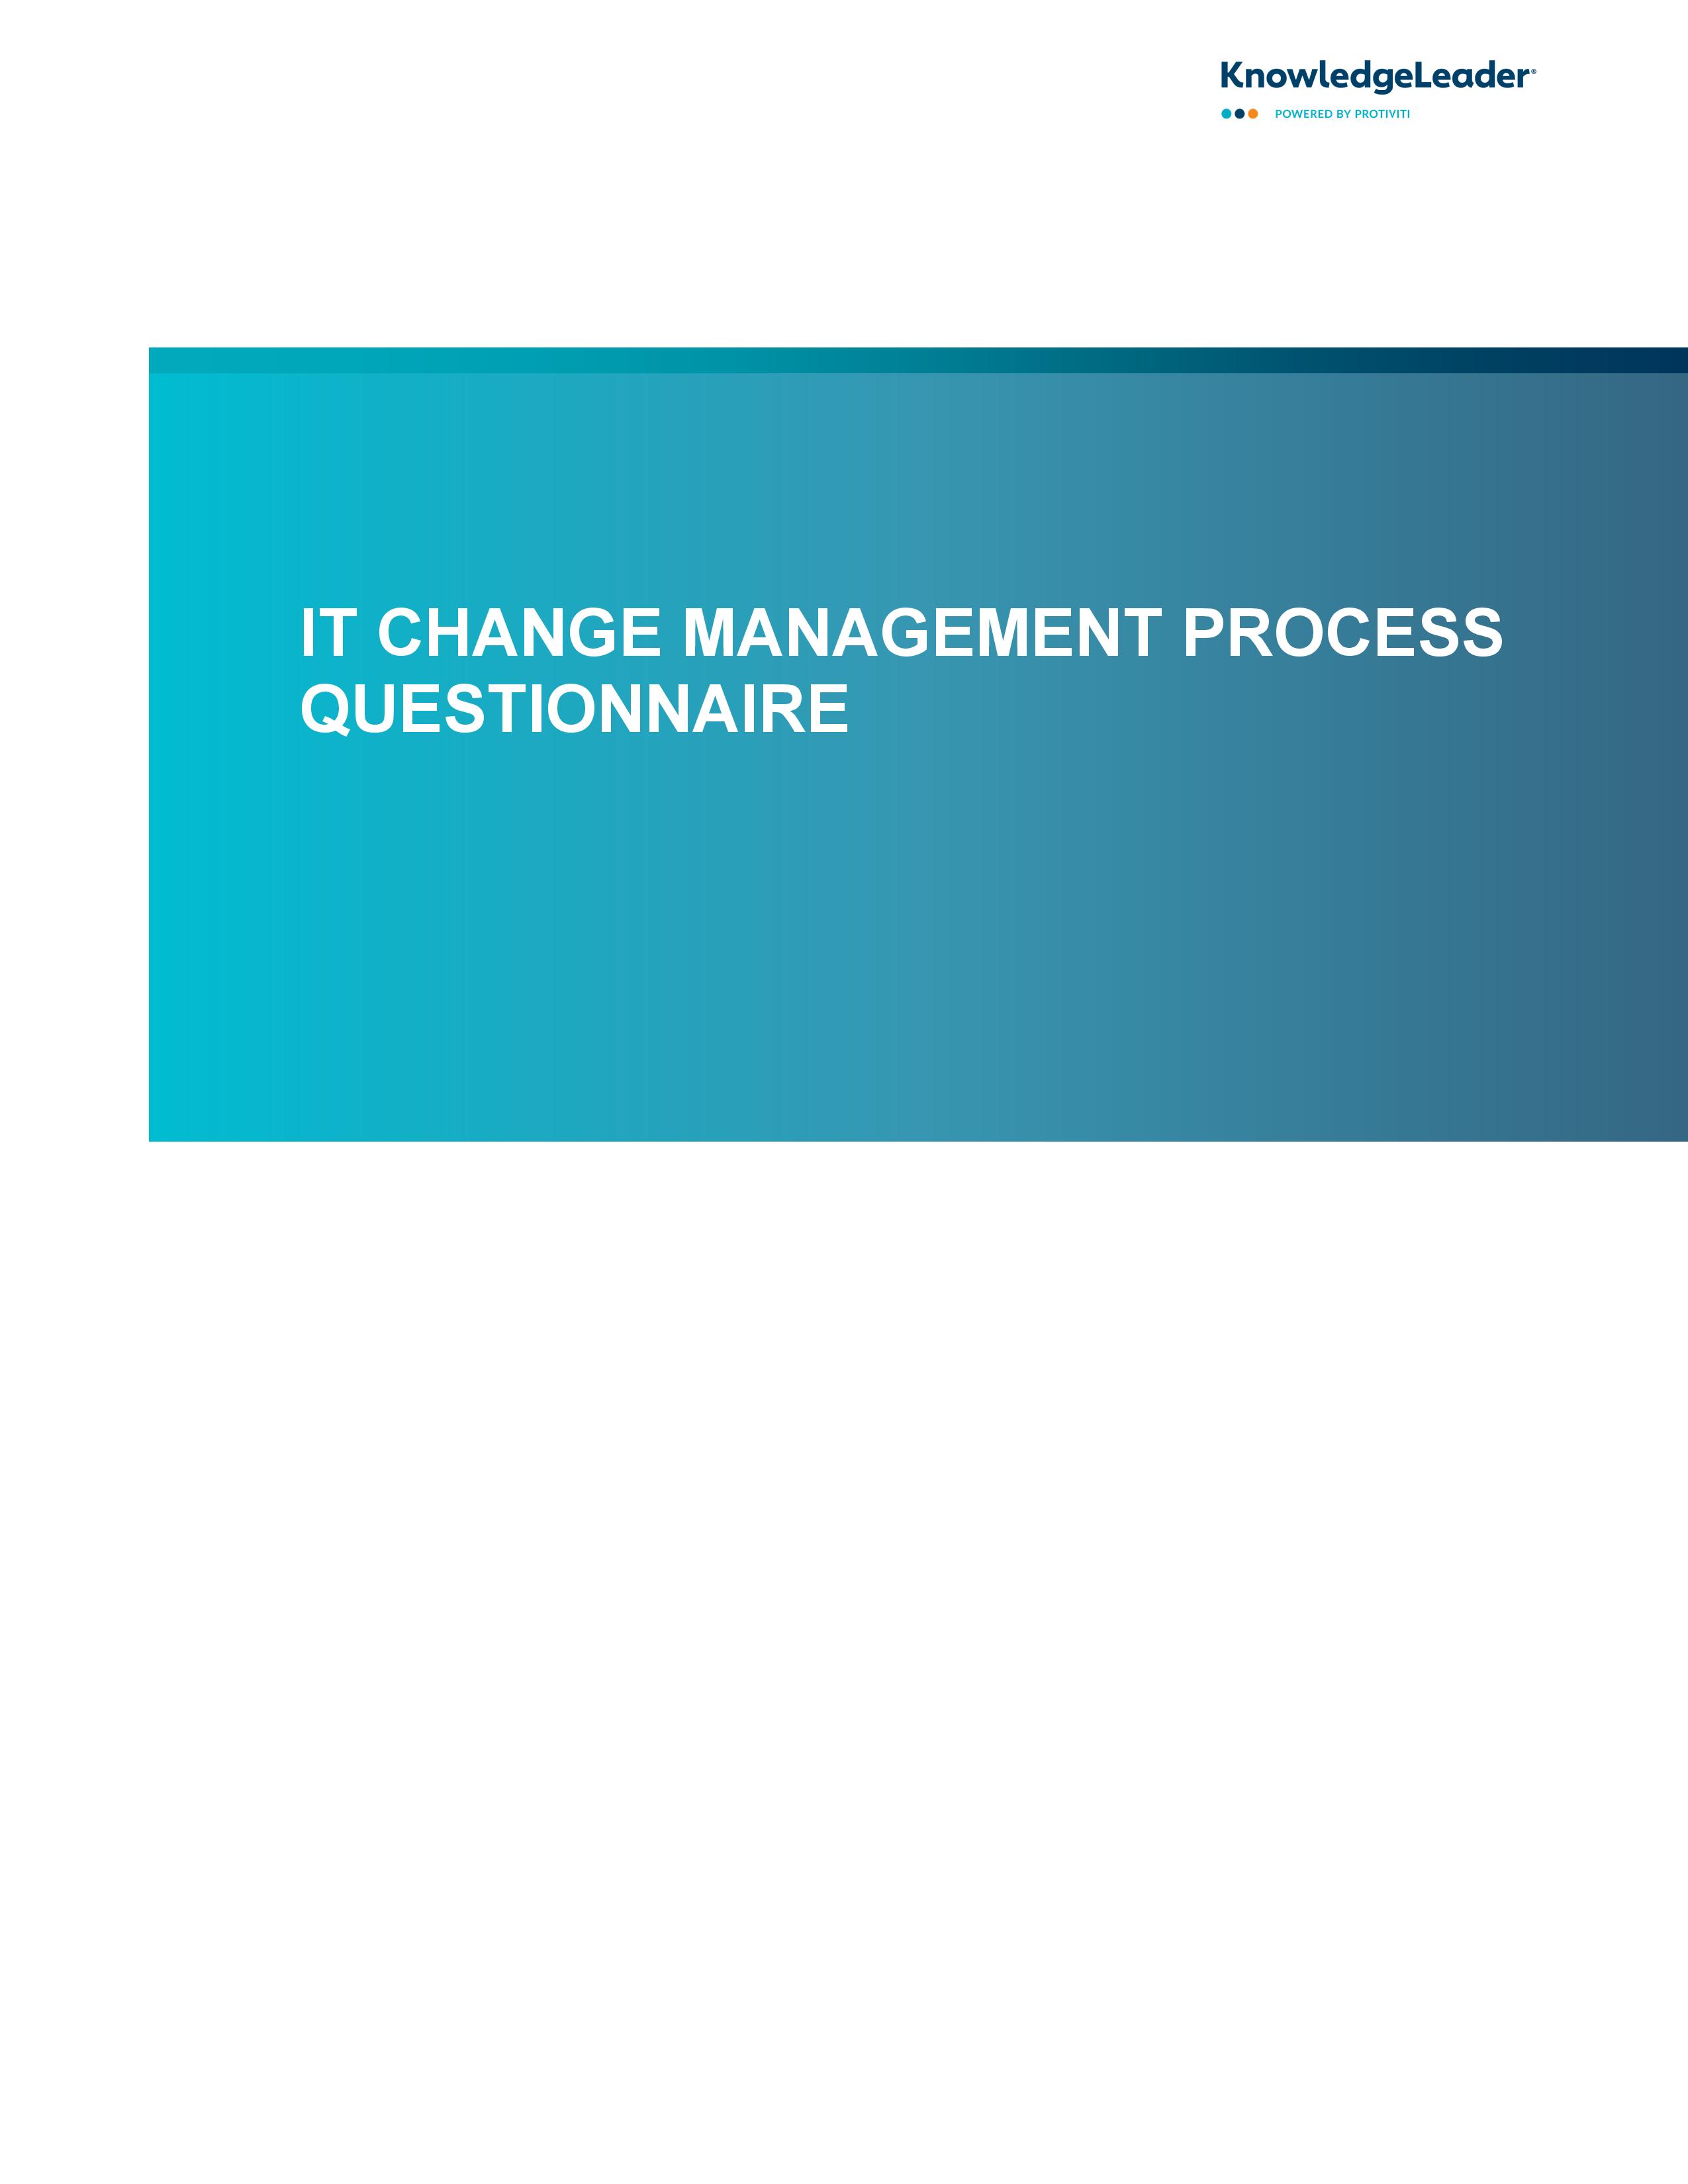 screenshot of the first page of IT Change Management Process Questionnaire